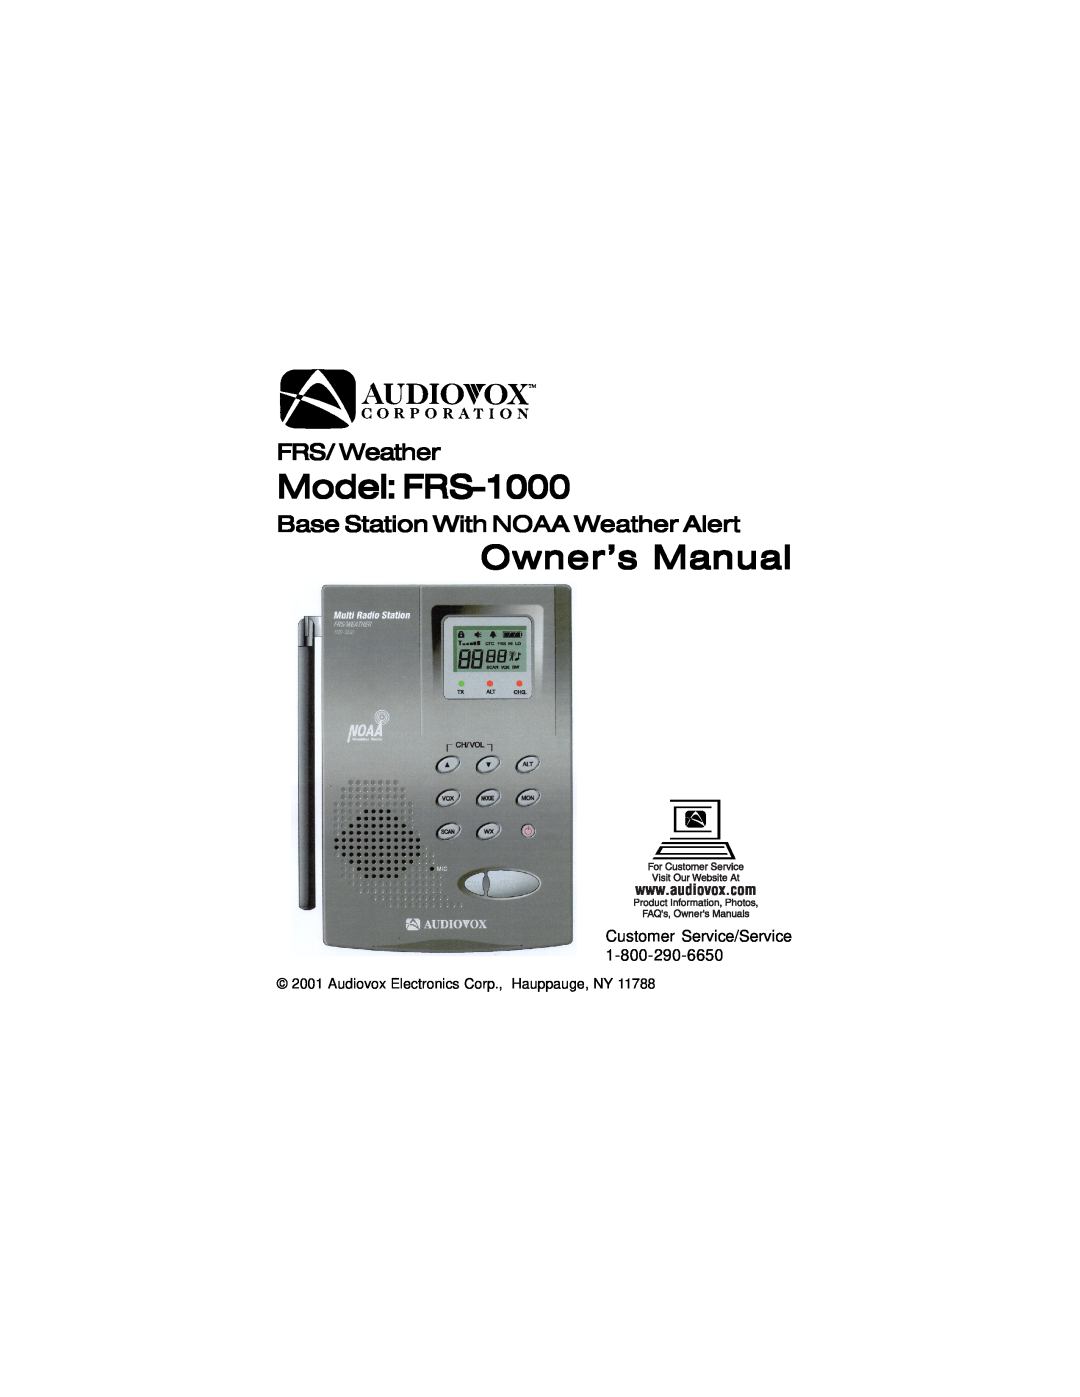 Audiovox FRS-1000F manual Model FRS-1000, Owner’s Manual, FRS/Weather, Base Station With NOAA Weather Alert 